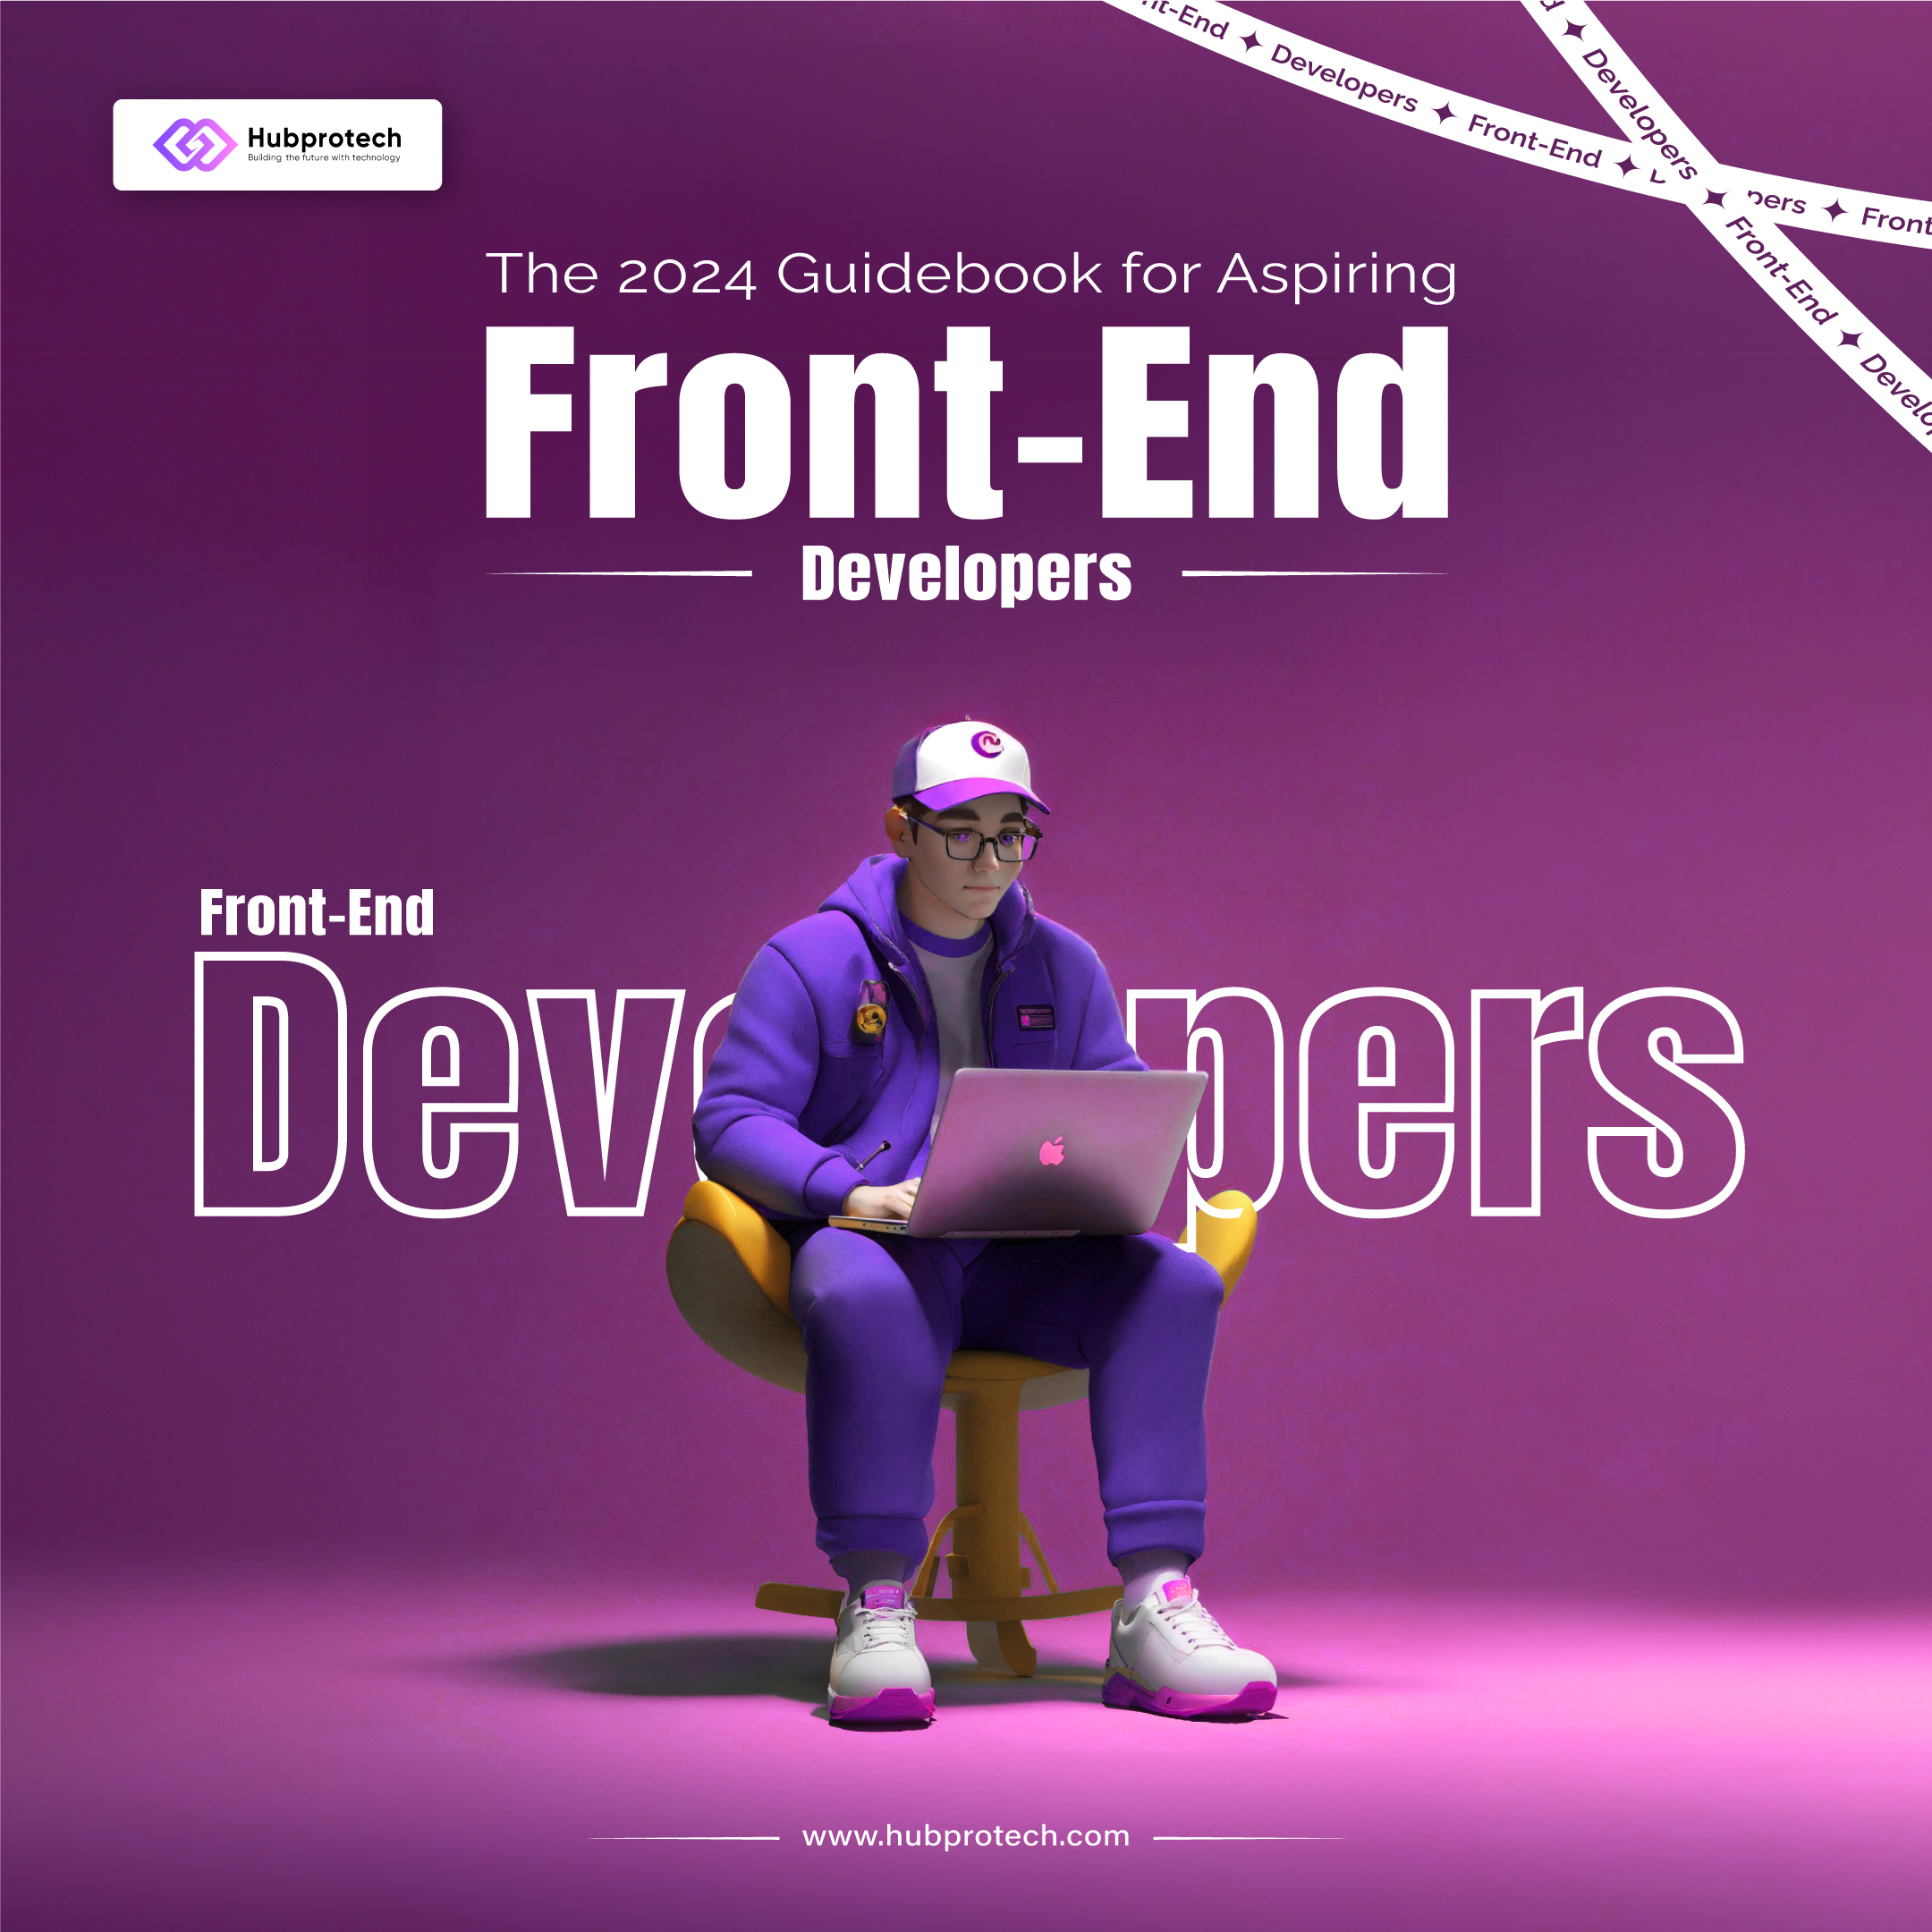 The 2024 Guidebook for aspiring Front-end developers by Hubprotech